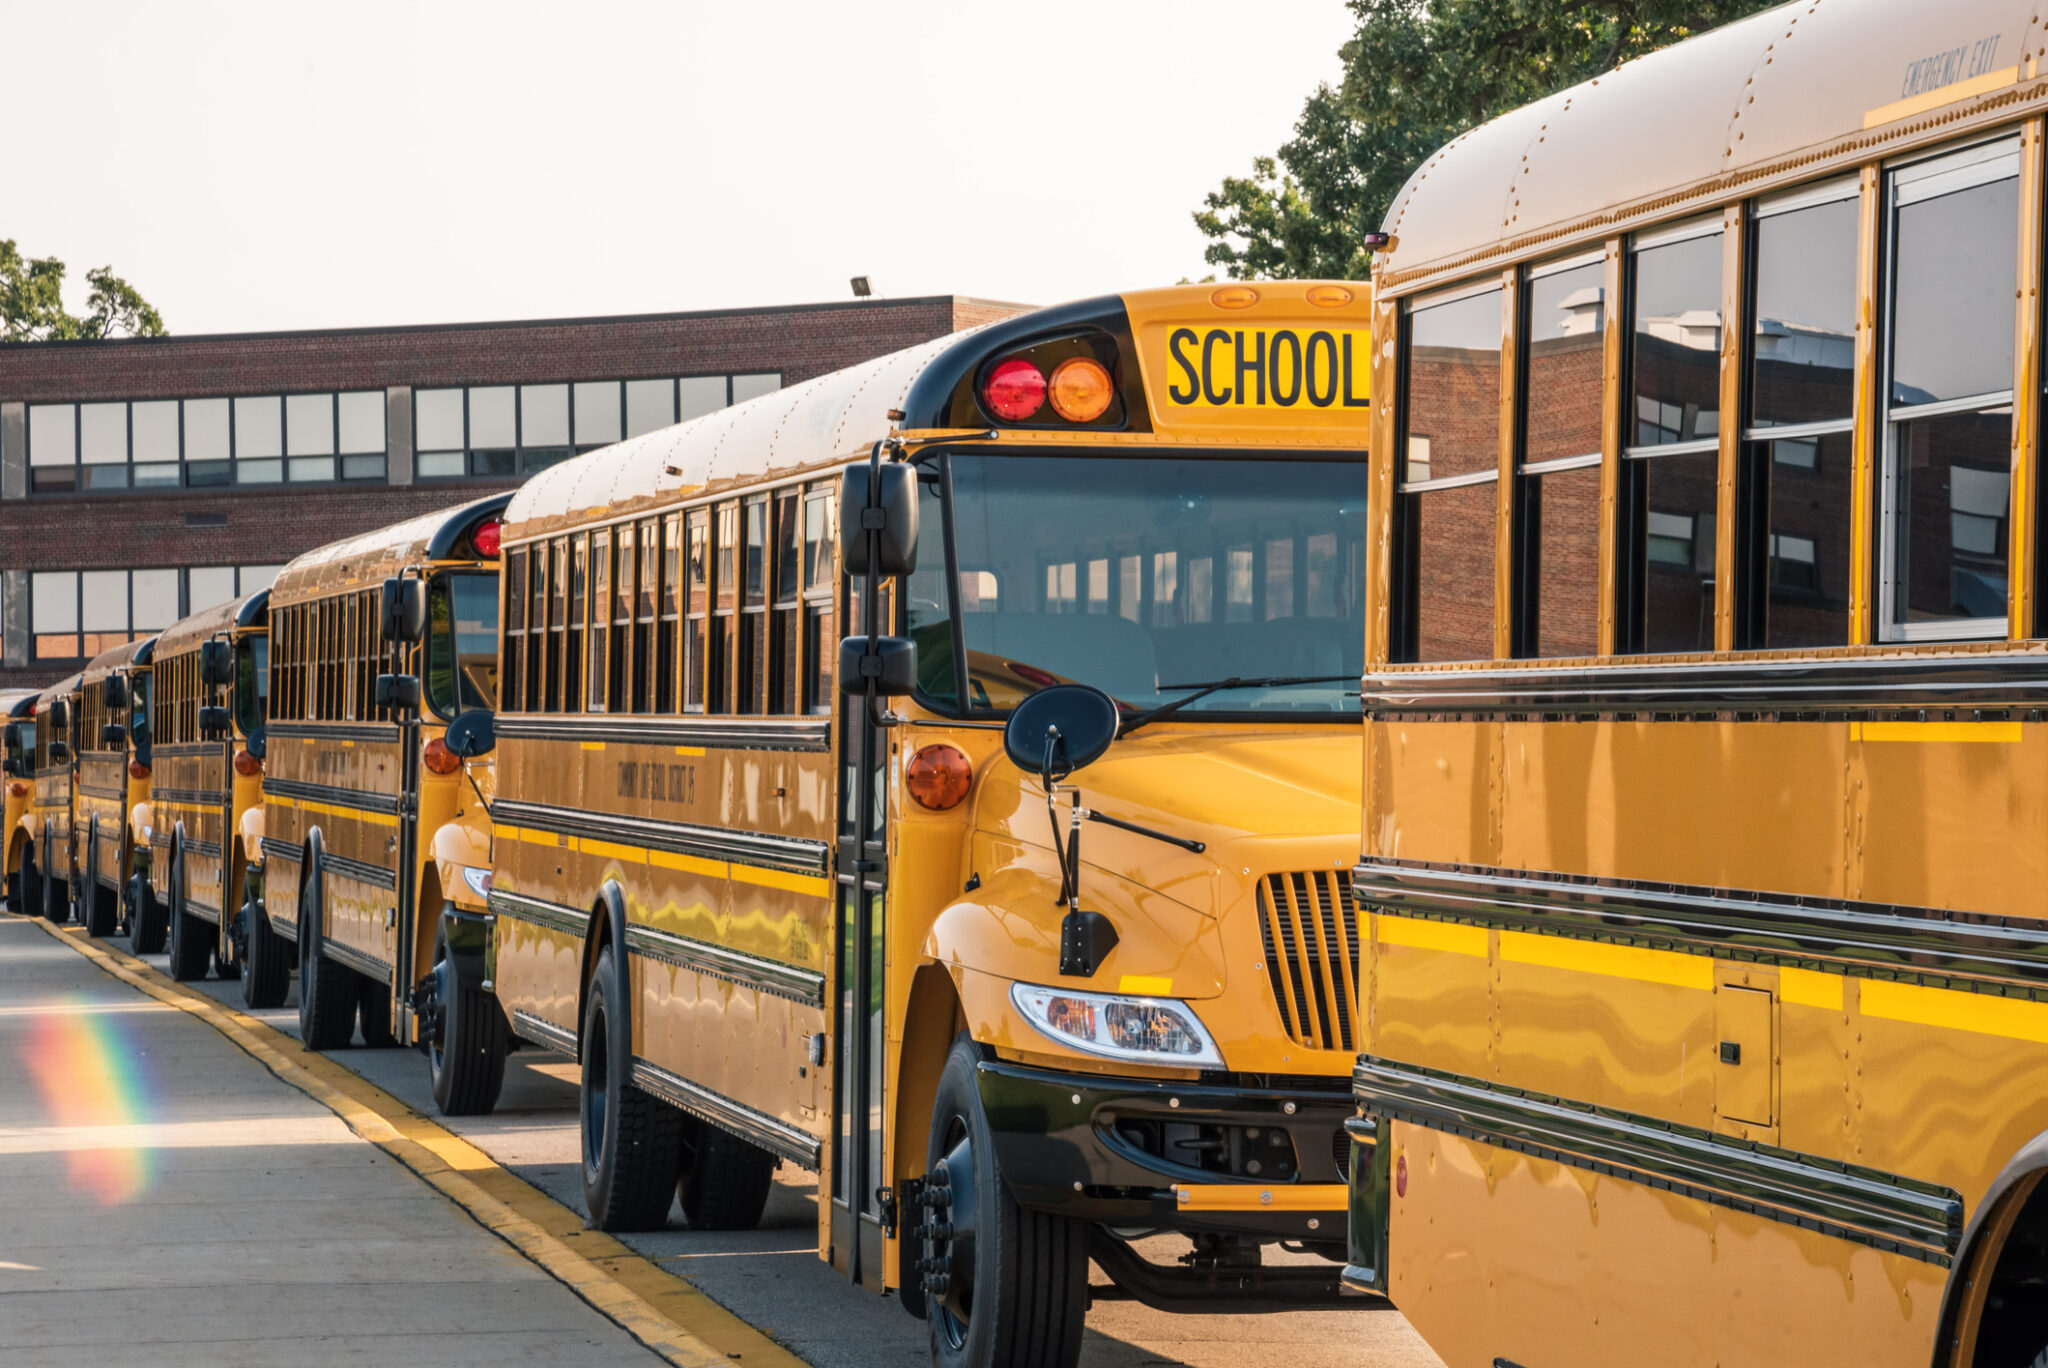  A row of yellow school buses parked in a school bus parking lot.